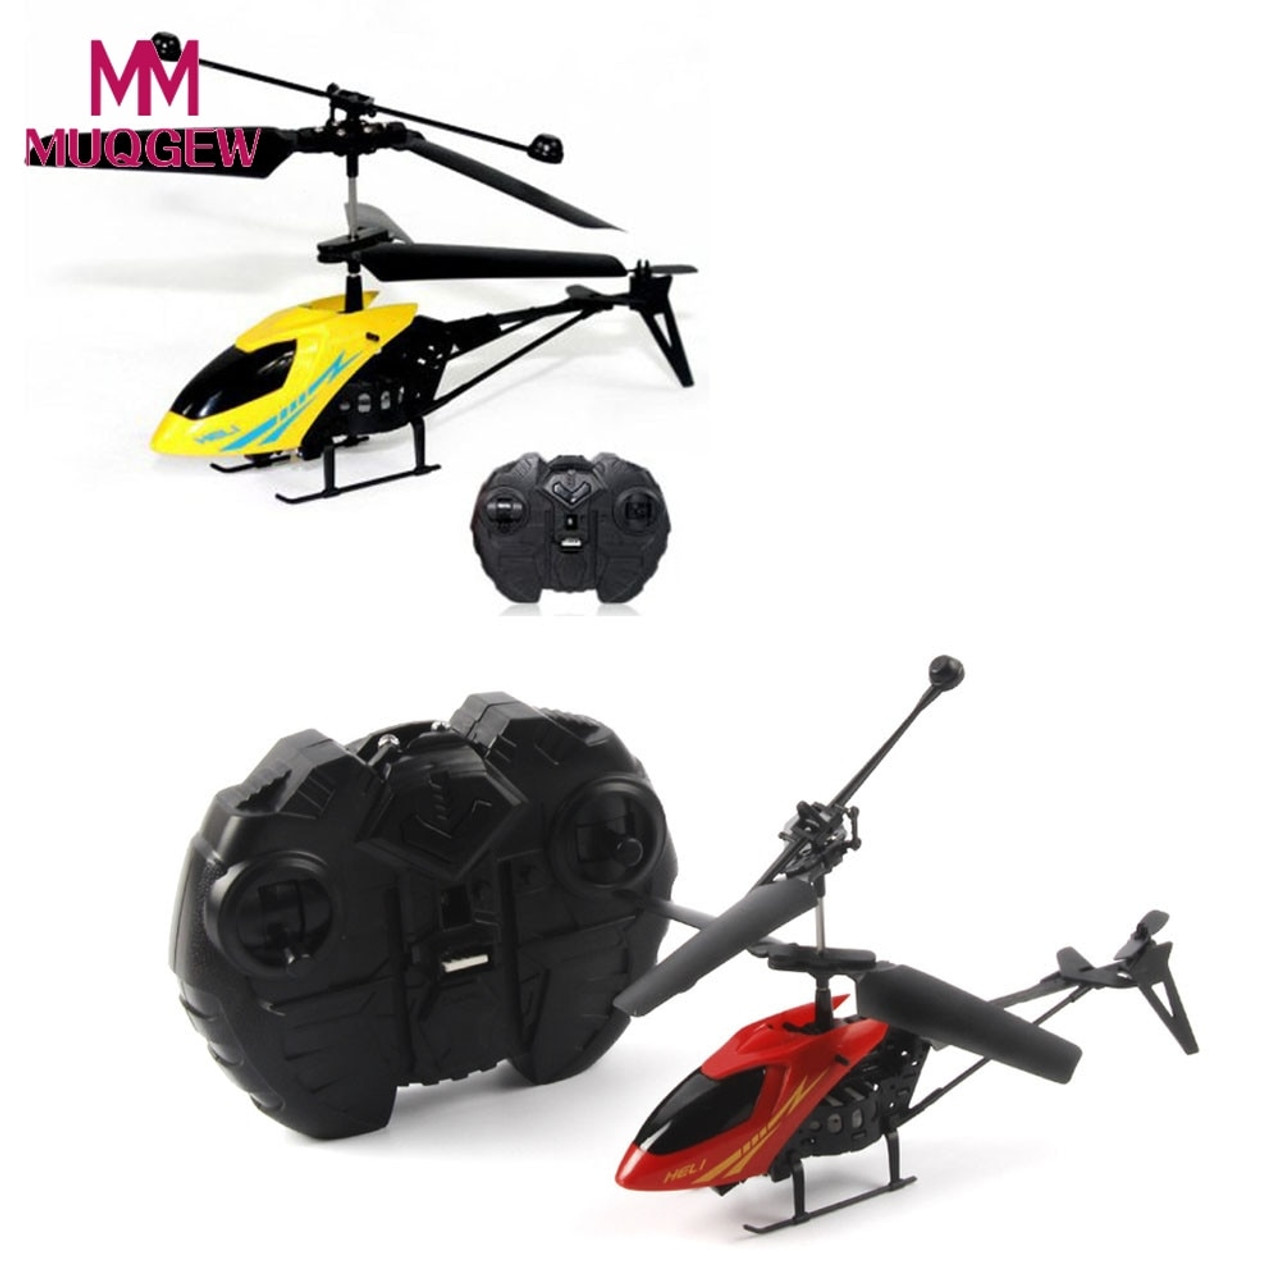 Mini Nano Remote Control Rc Helicopter Gift Toys For Kids Micro Drone Gift 2ch Helicopters Rc Model Vehicles Kits